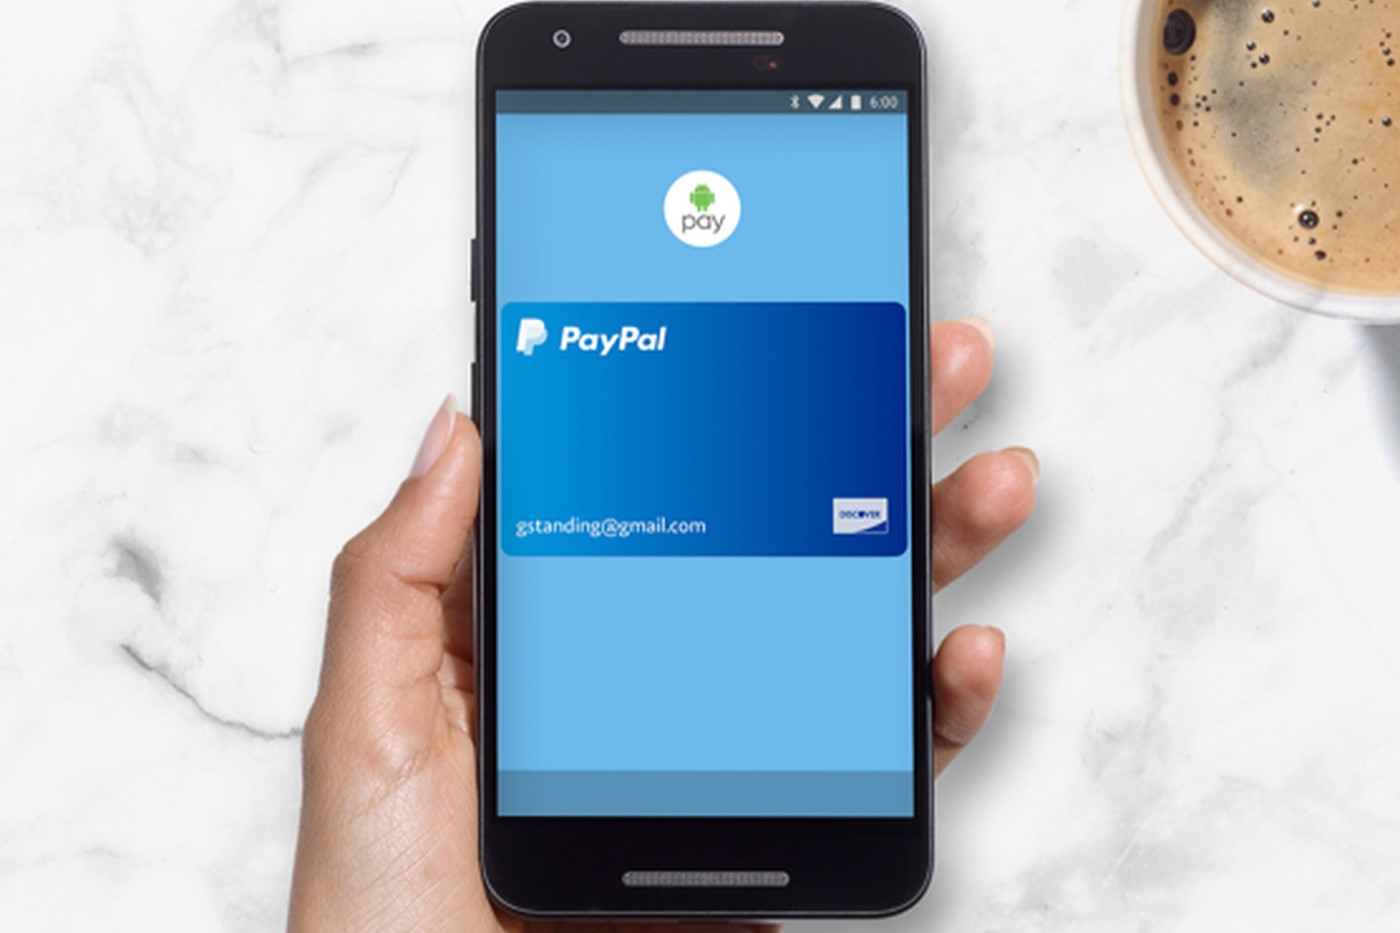 Making Secure Payments: Using PayPal With NFC